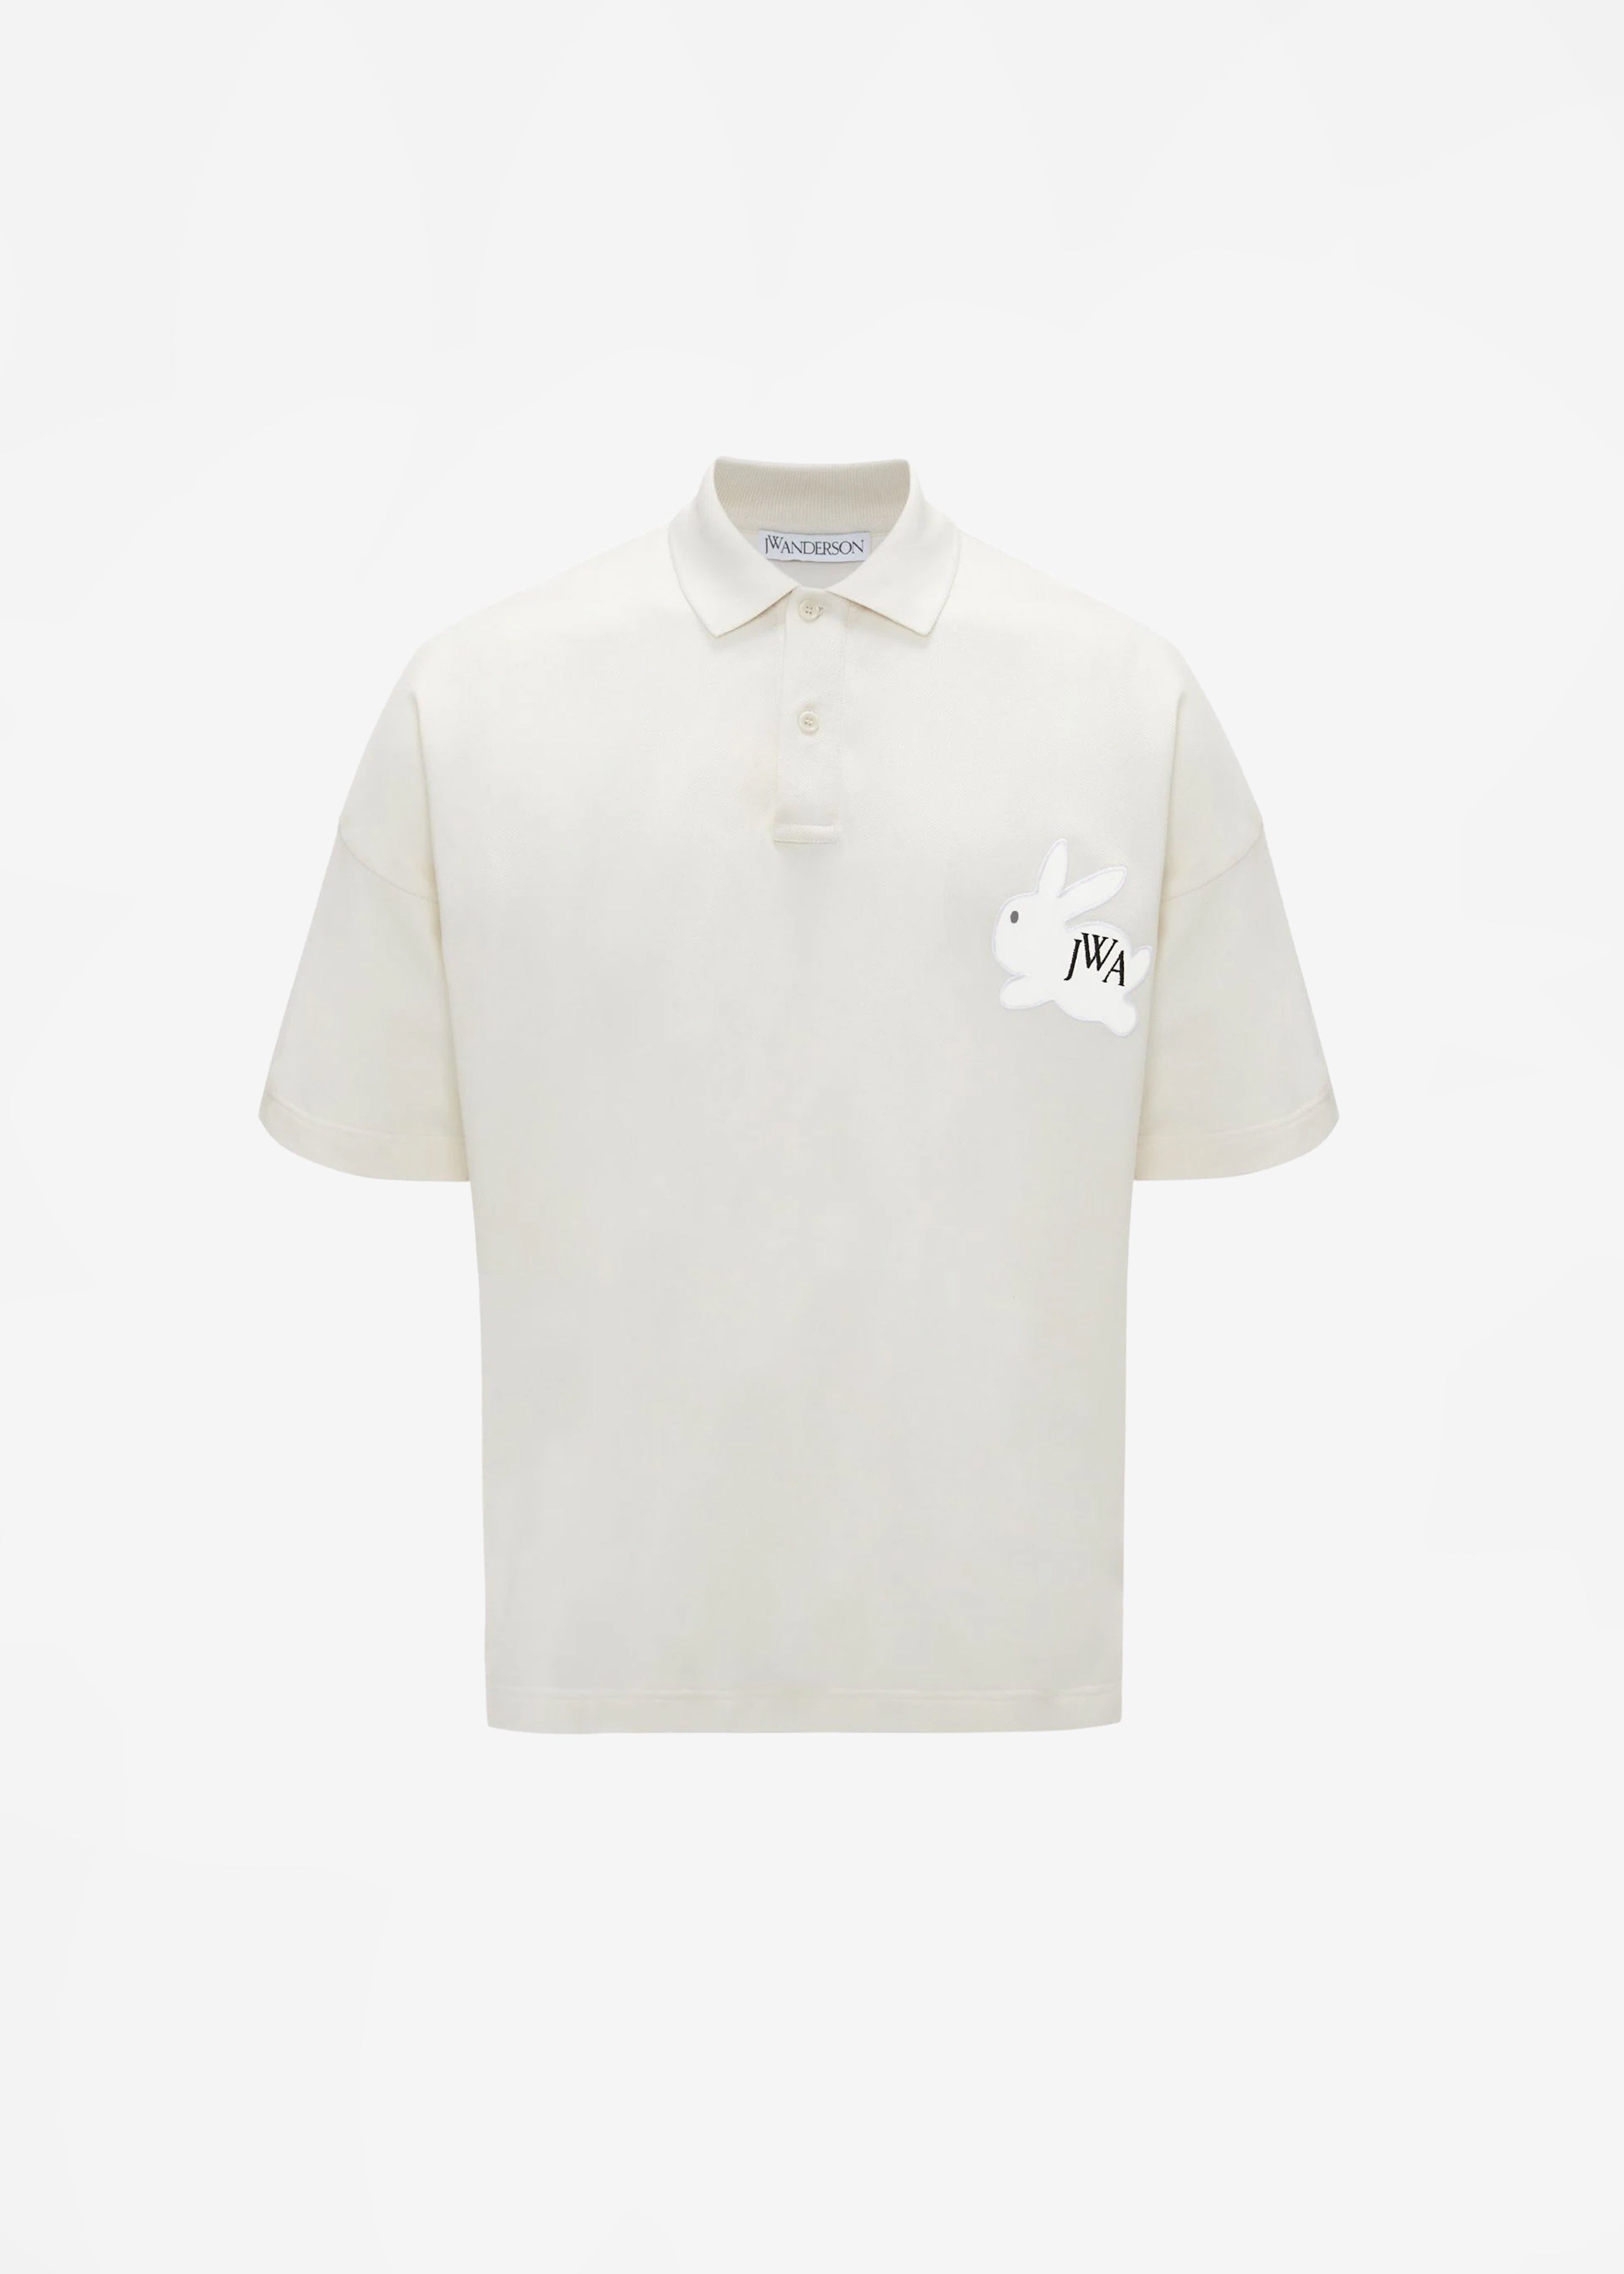 JW Anderson Bunny Embroidery Polo Shirt - Beige